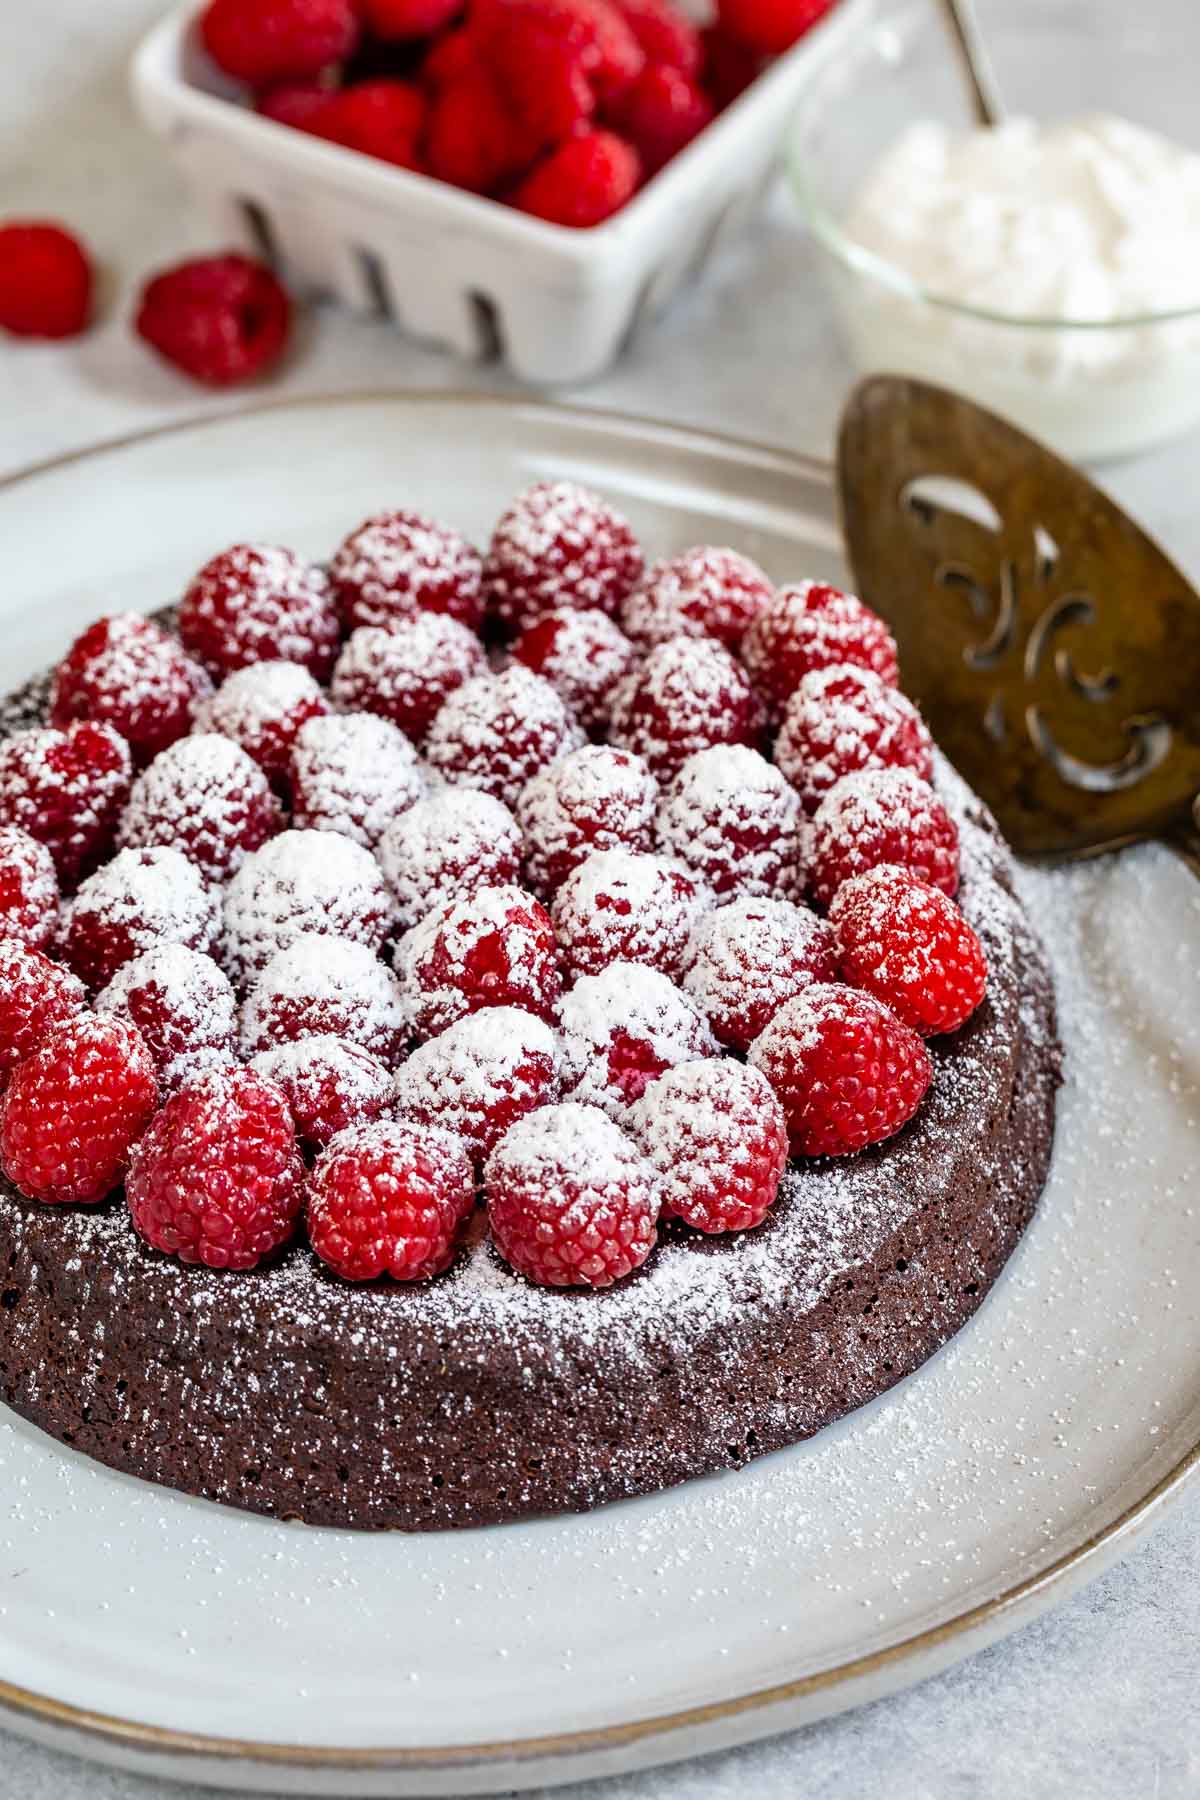 Flourless chocolate cake topped with raspberries and powdered sugar